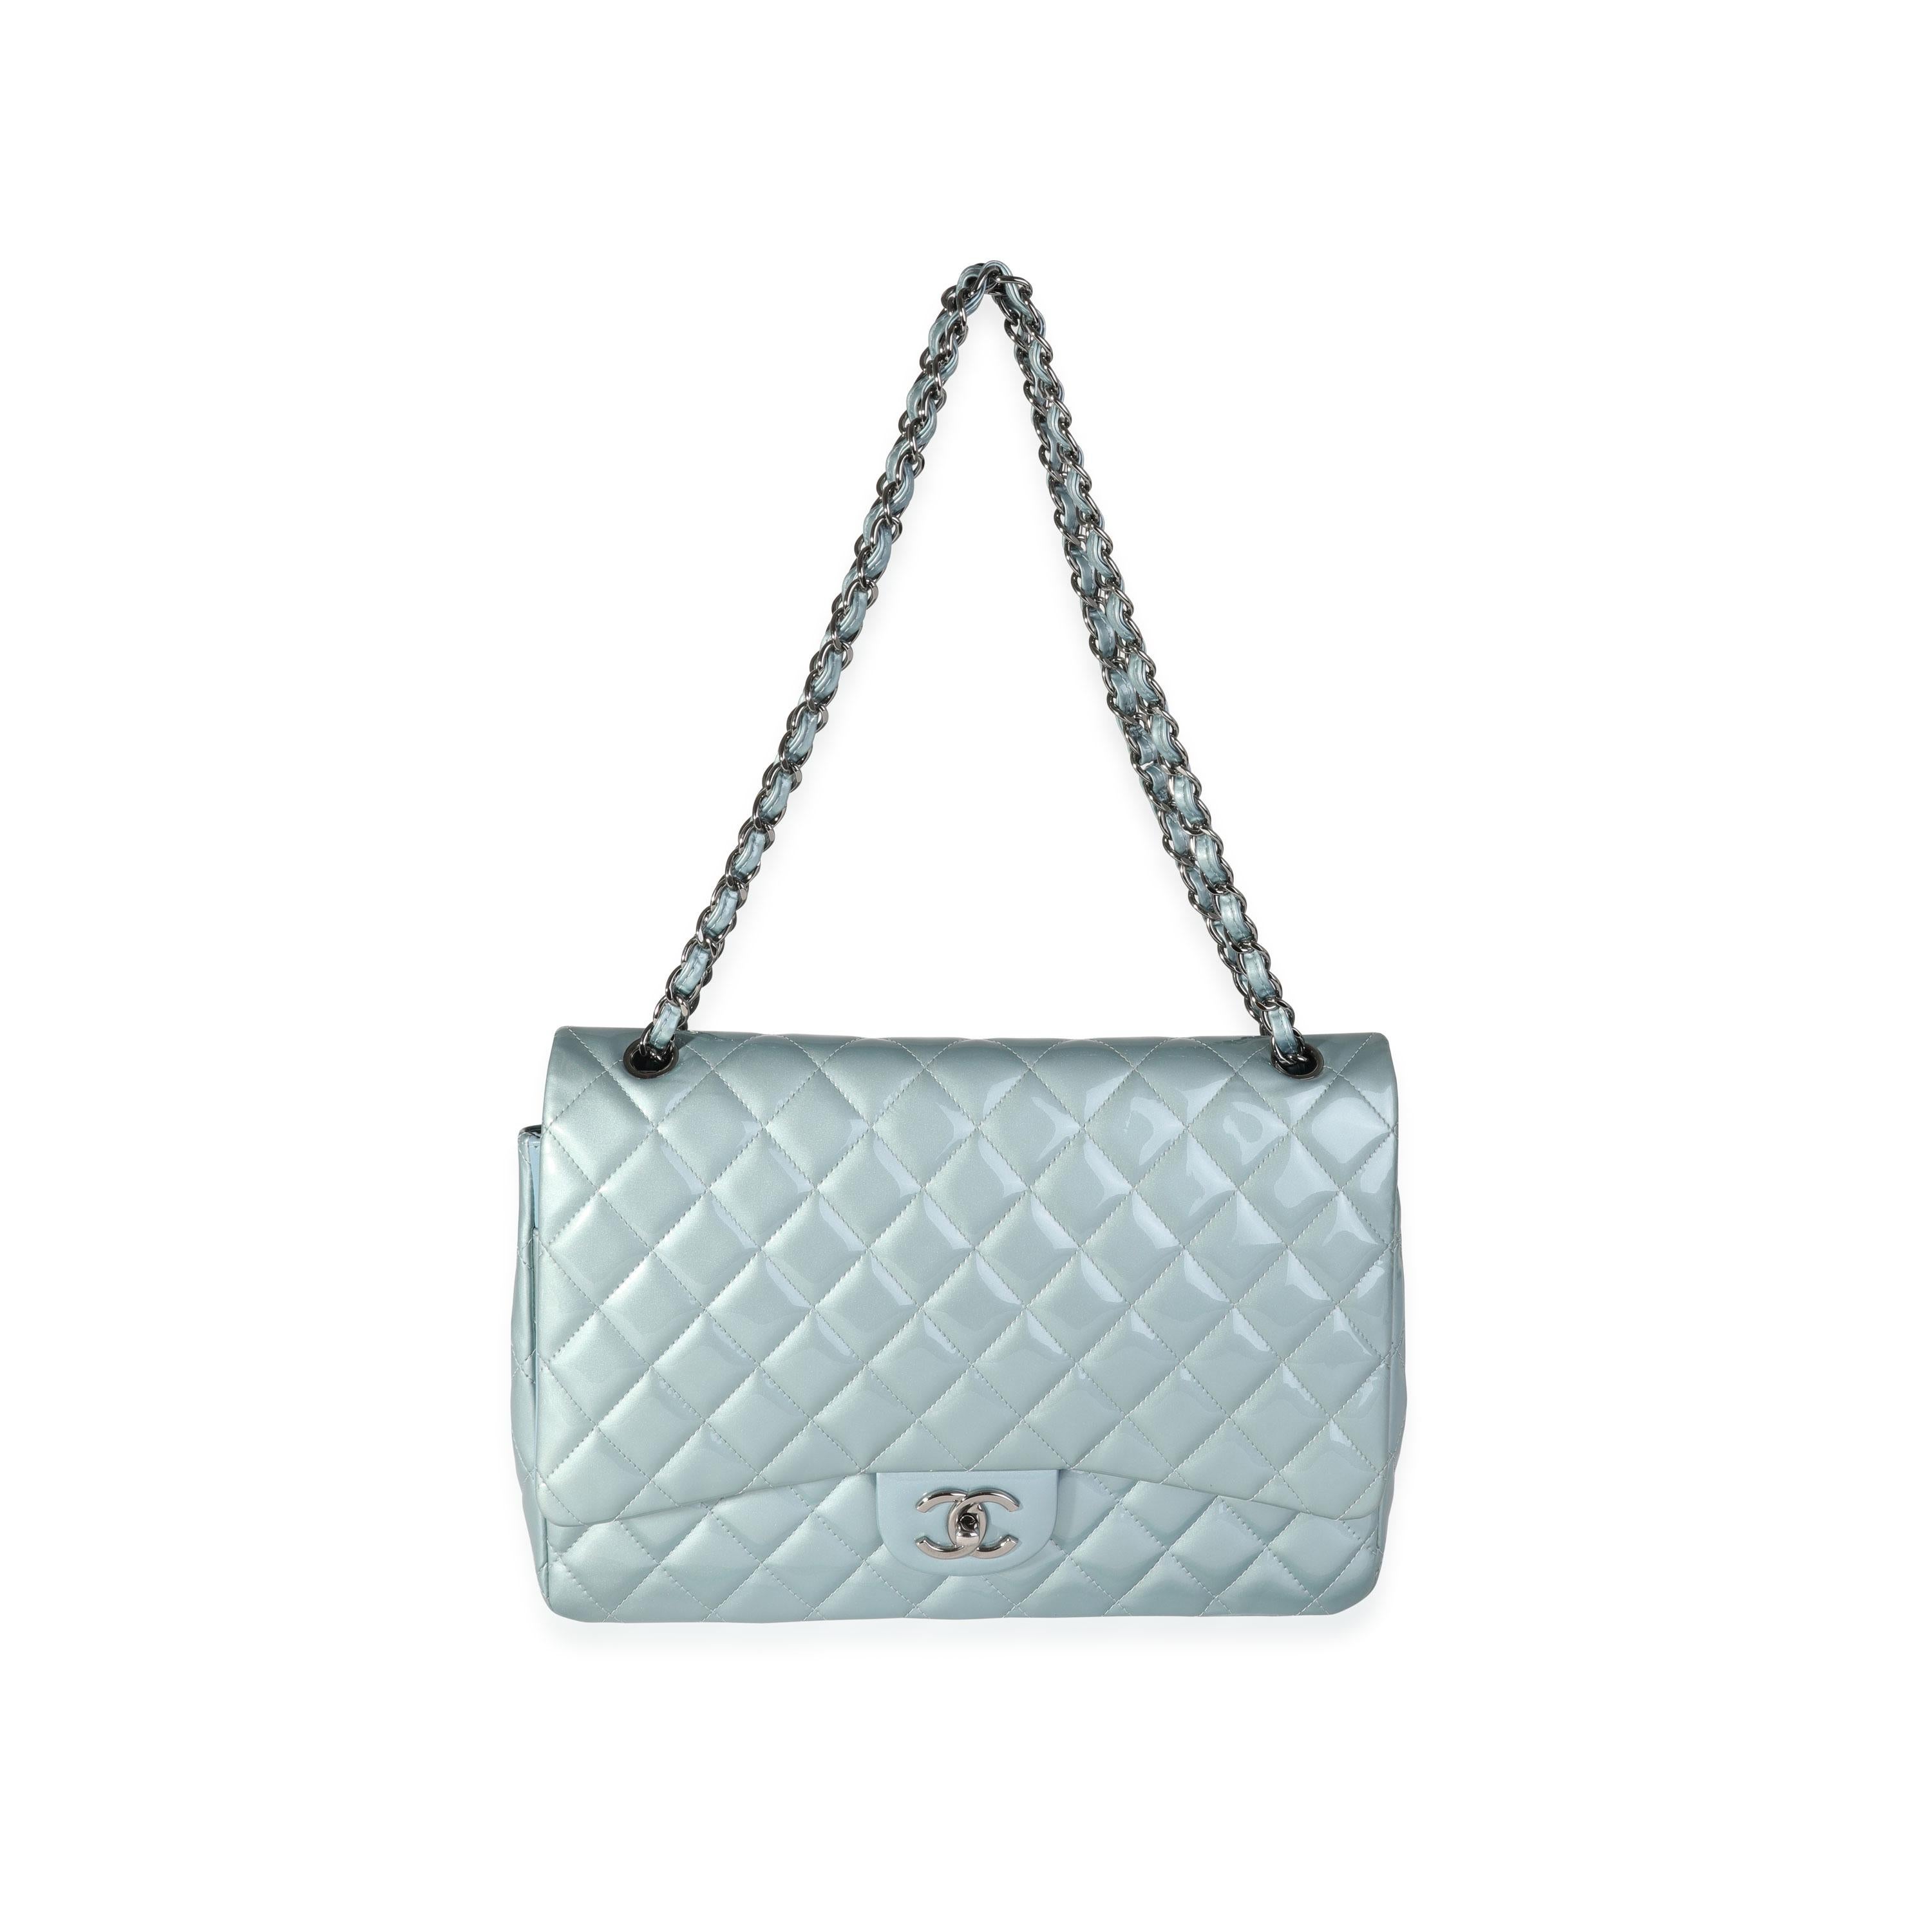 Listing Title: Chanel Light Blue Quilted Patent Leather Maxi Classic Double Flap
SKU: 118418
MSRP: 10000.00

Handbag Condition: Very Good
Condition Comments: Very Good Condition. Scuff at back corner. Interior shows signs of use.
Brand: